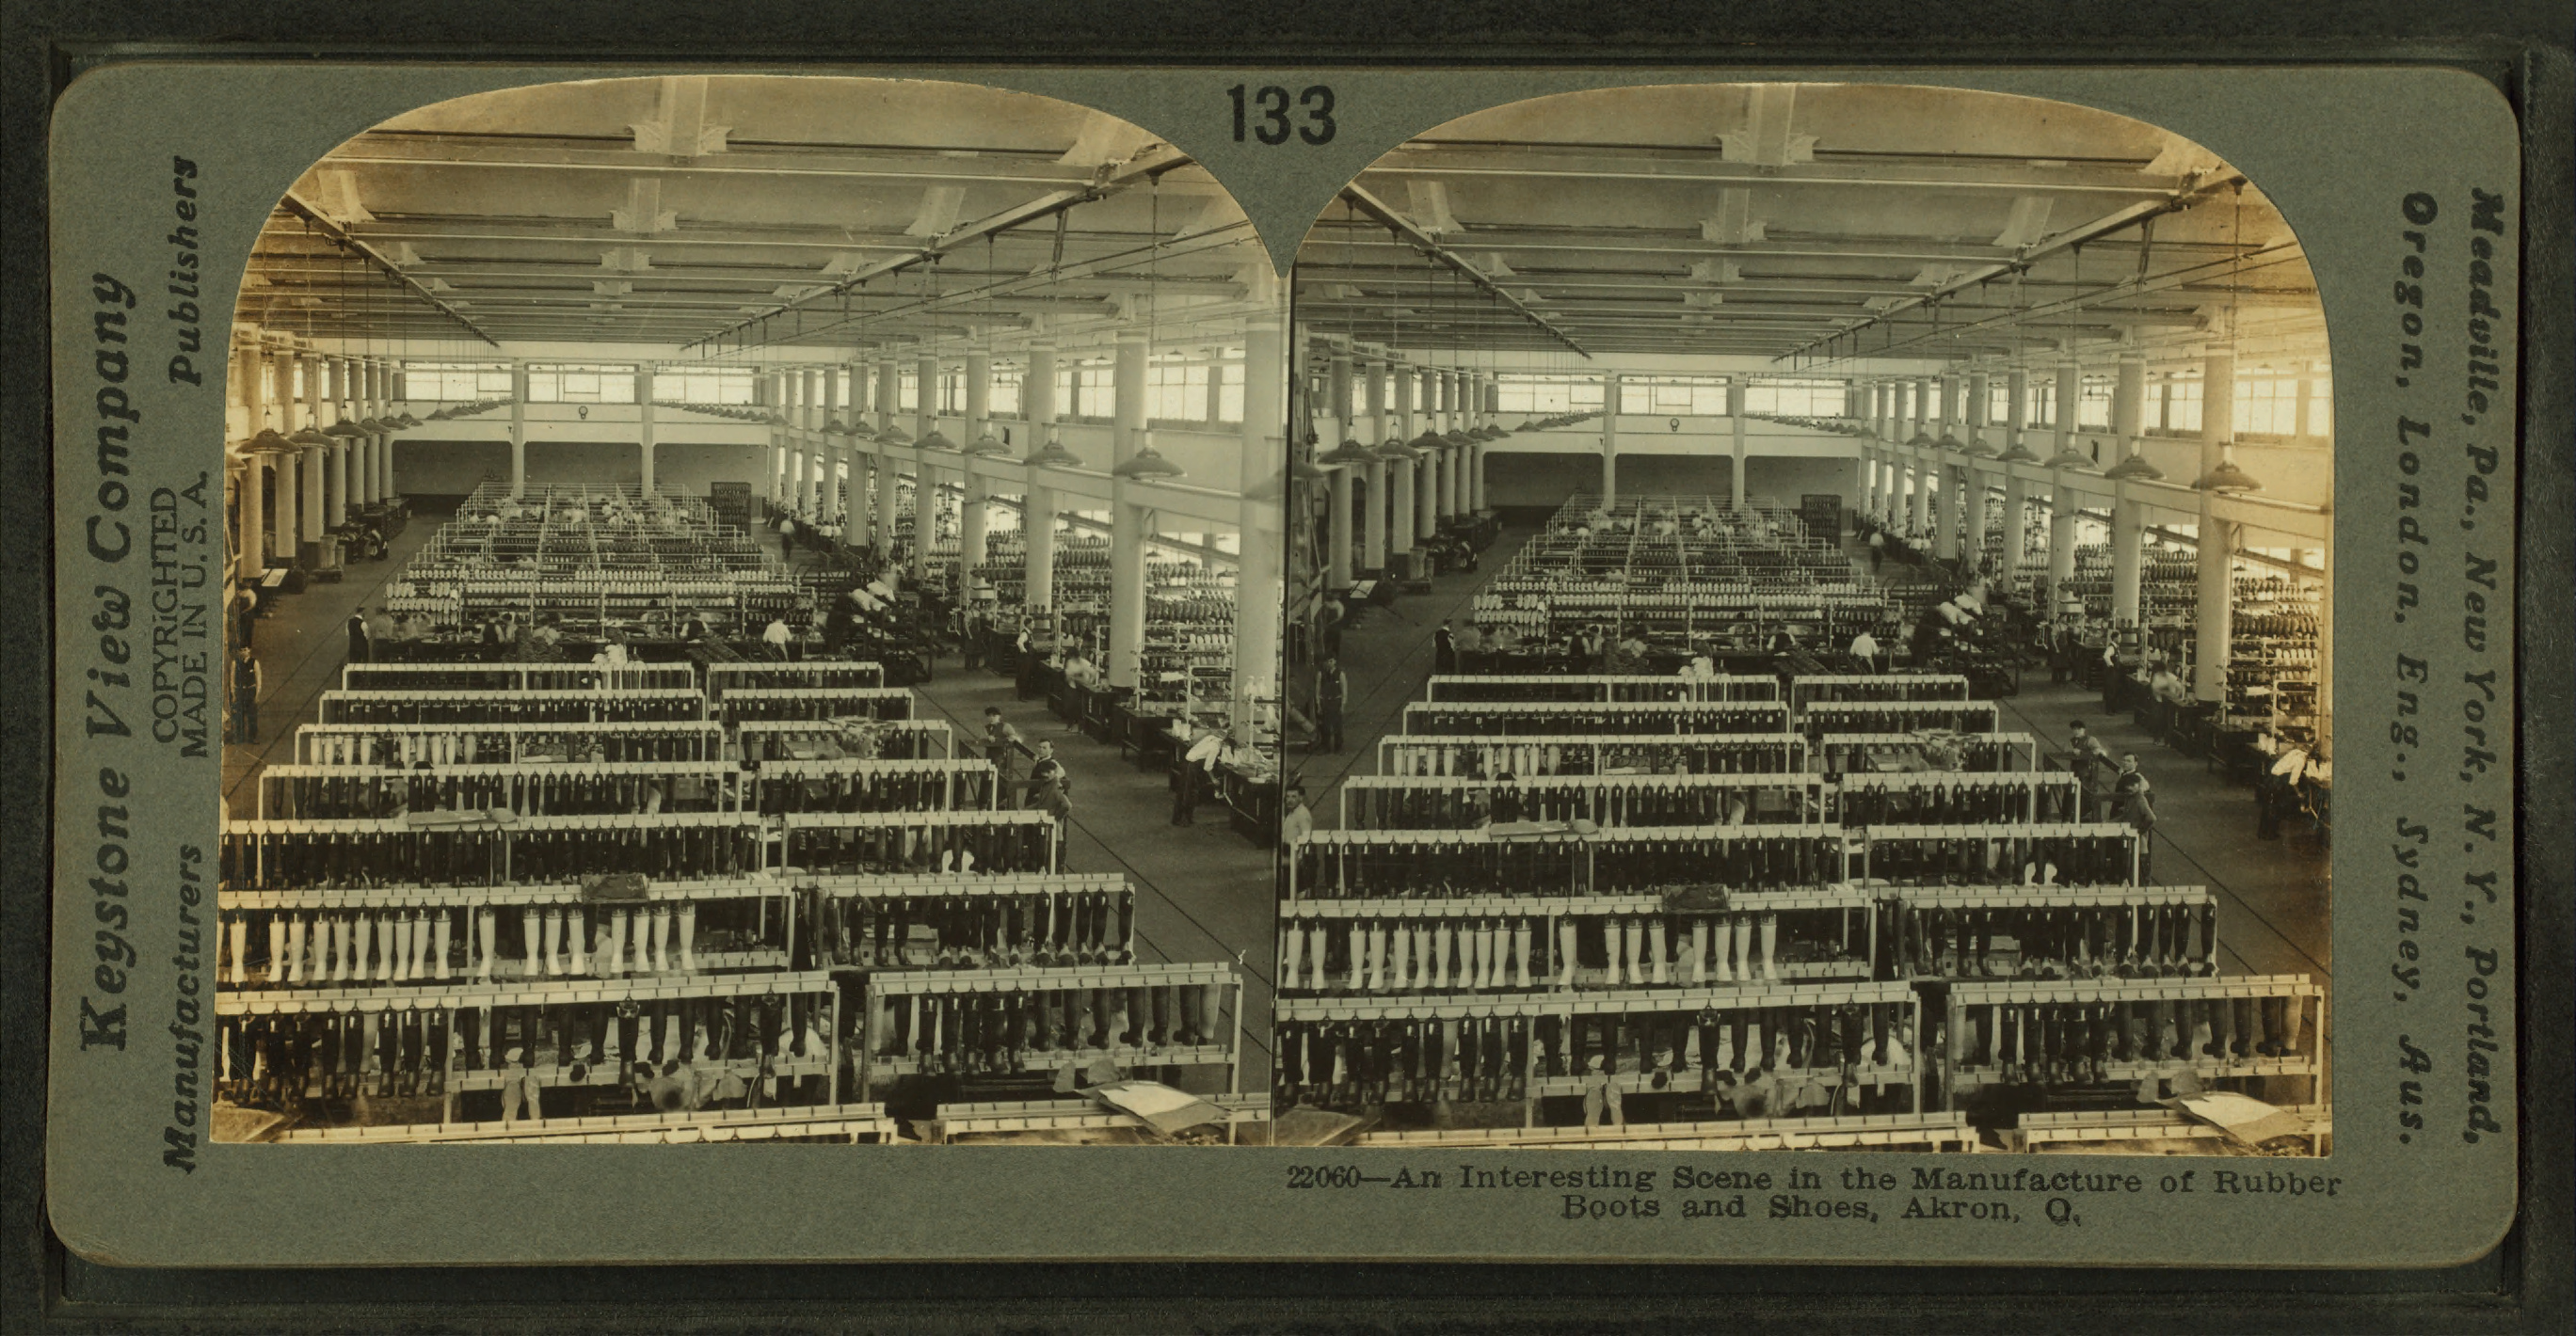 An interesting scene in the manufacture of rubber boots and shoes, Akron, Ohio, by Keystone View Company